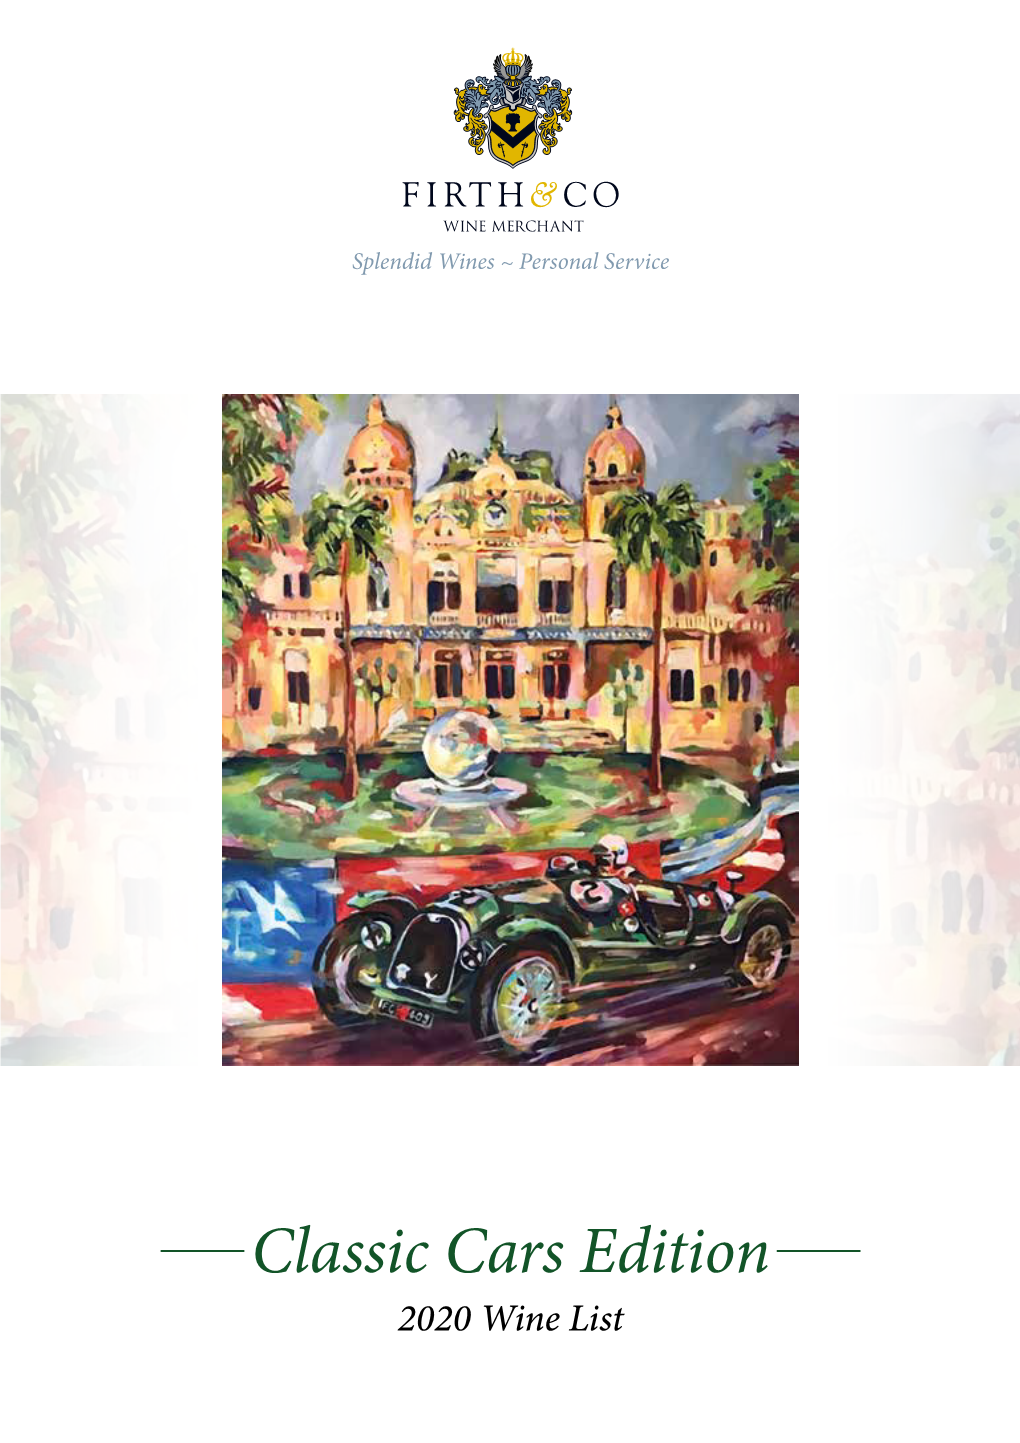 Classic Cars Edition 2020 Wine List the Wolseley Motor Company Was a British Automobile 2020 Wine List - Racing Edition Manufacturer Founded in 1901